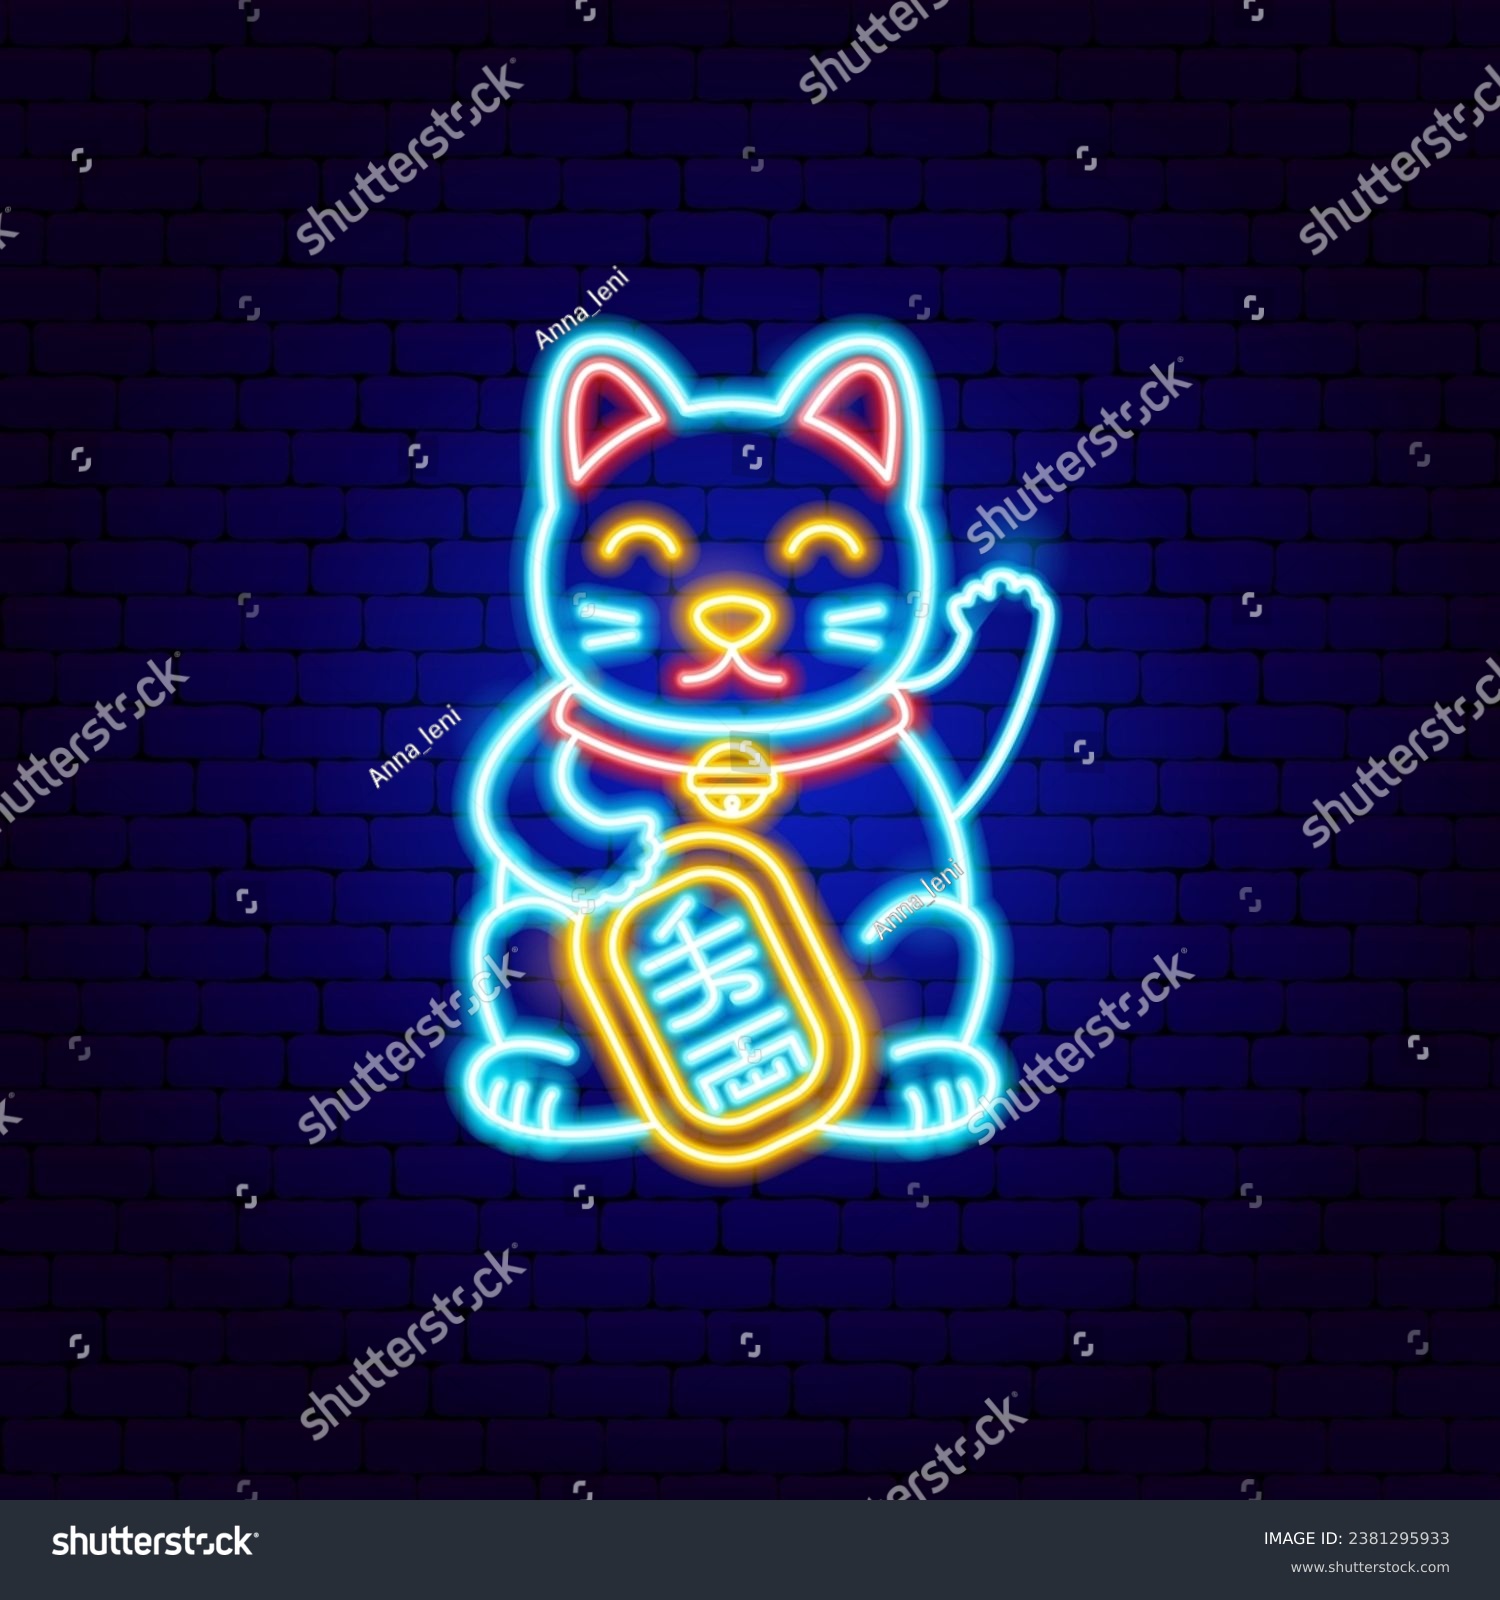 SVG of Chinese Luck Cat Neon Sign. Kitty Chin. Vector Illustration of Glowing Symbol. svg